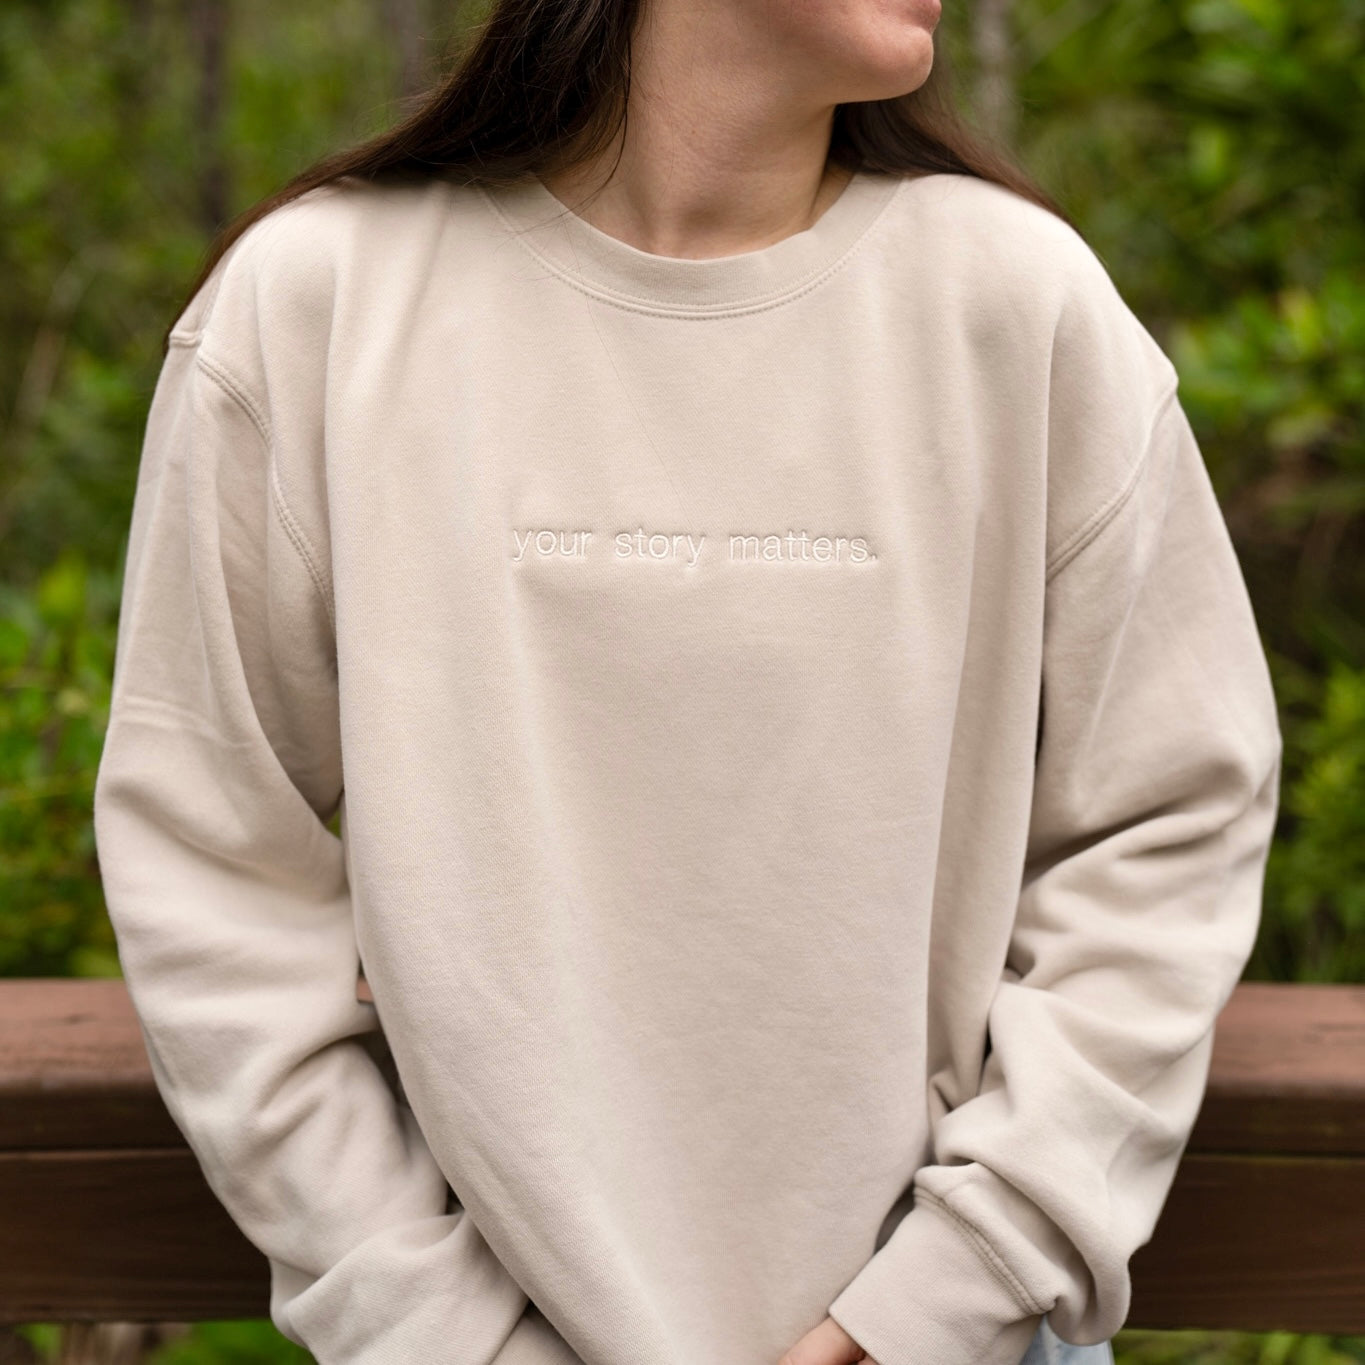 "your story matters" embroidered crewneck